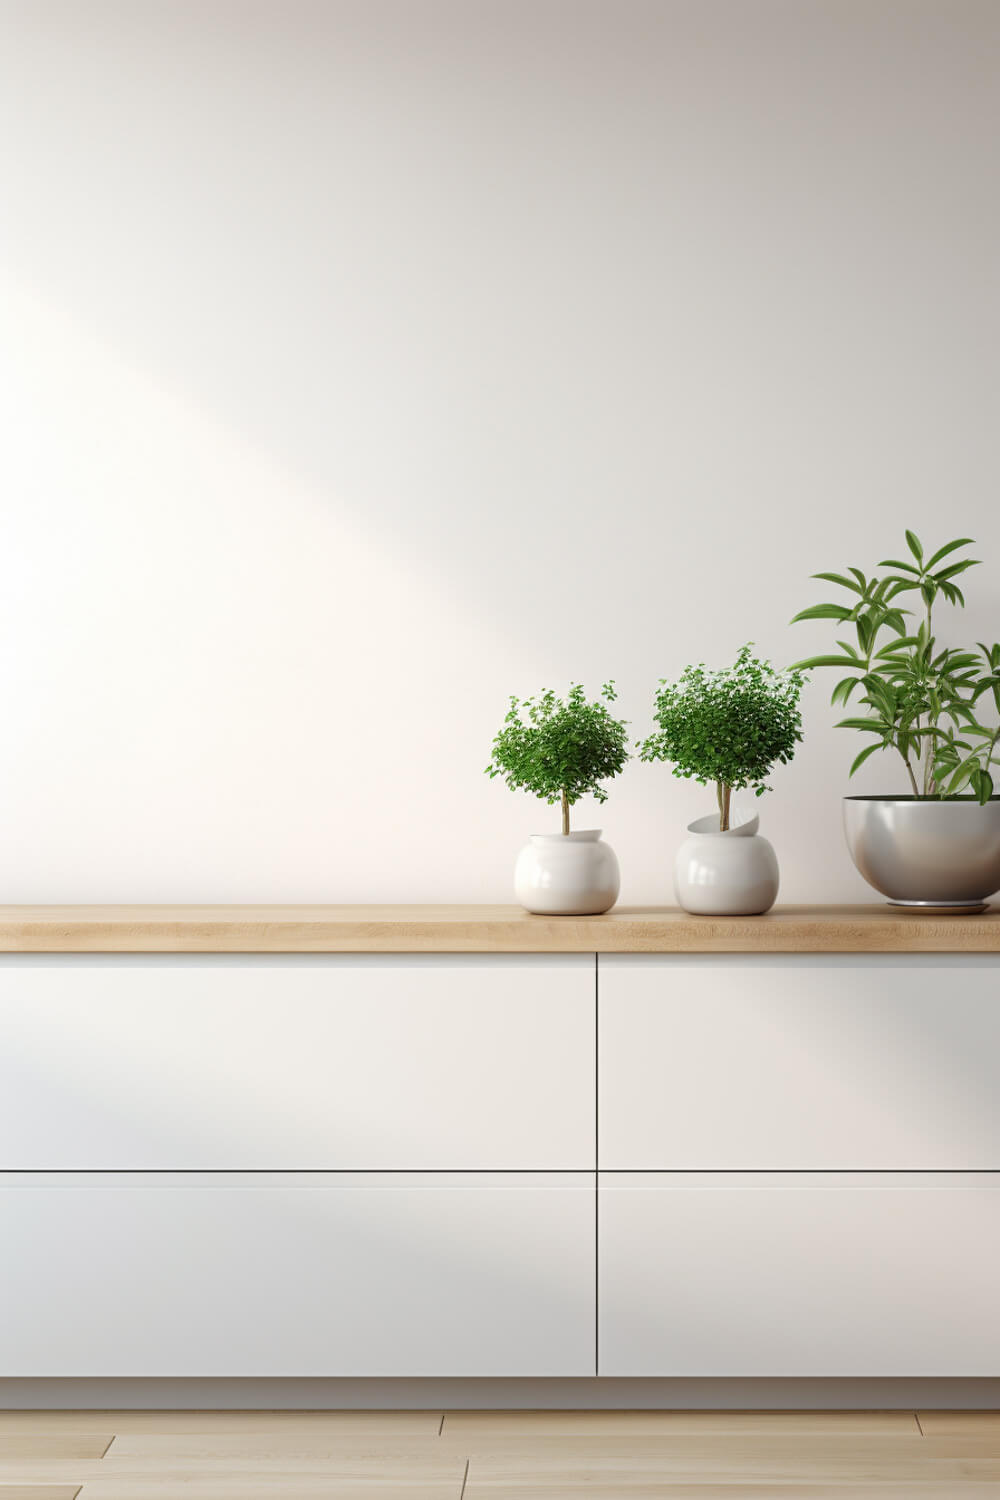 simple white kitchen drawers without handles and butcherblock countertop, three plants in pots on countertop, white walls, natural wood floors, modern style